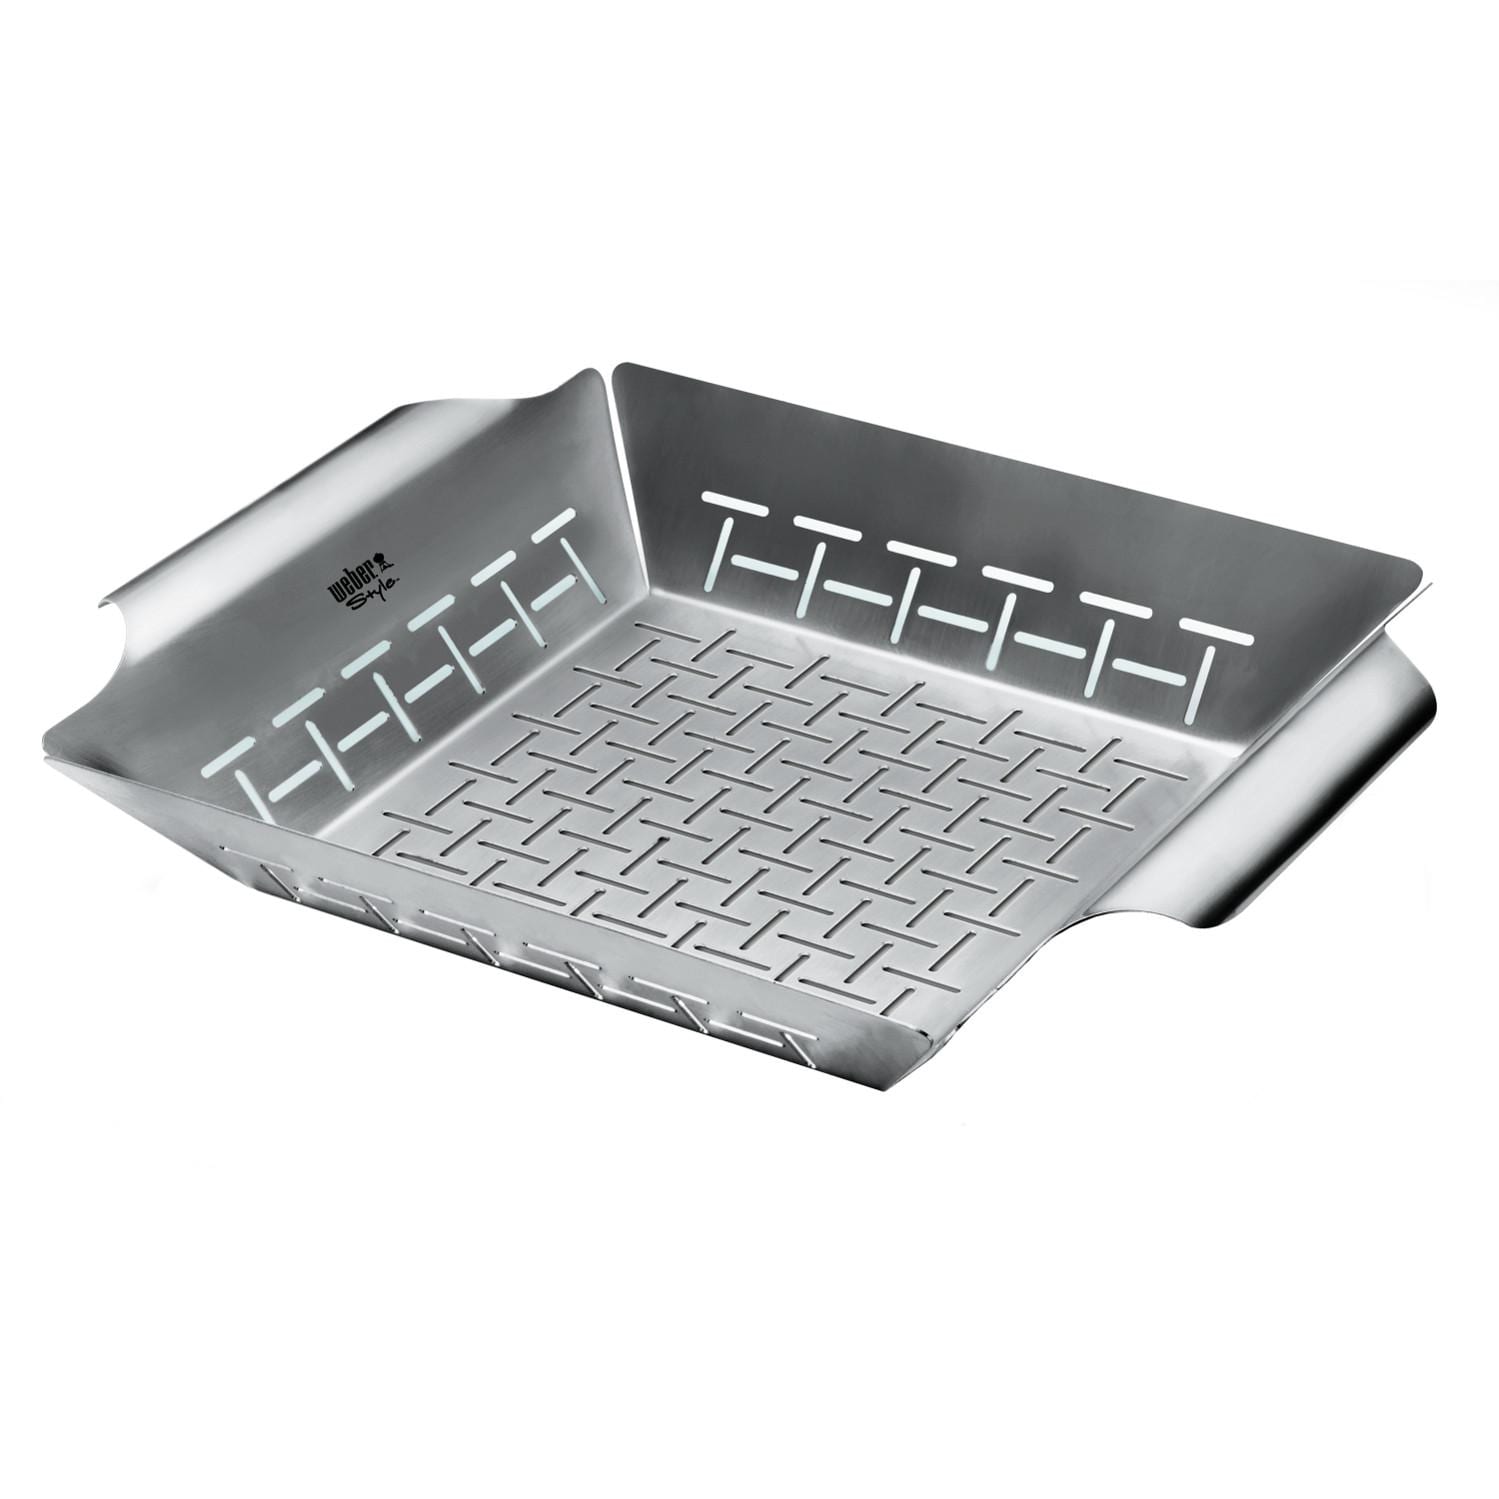 Weber Stainless Steel Grill Basket - image 2 of 3